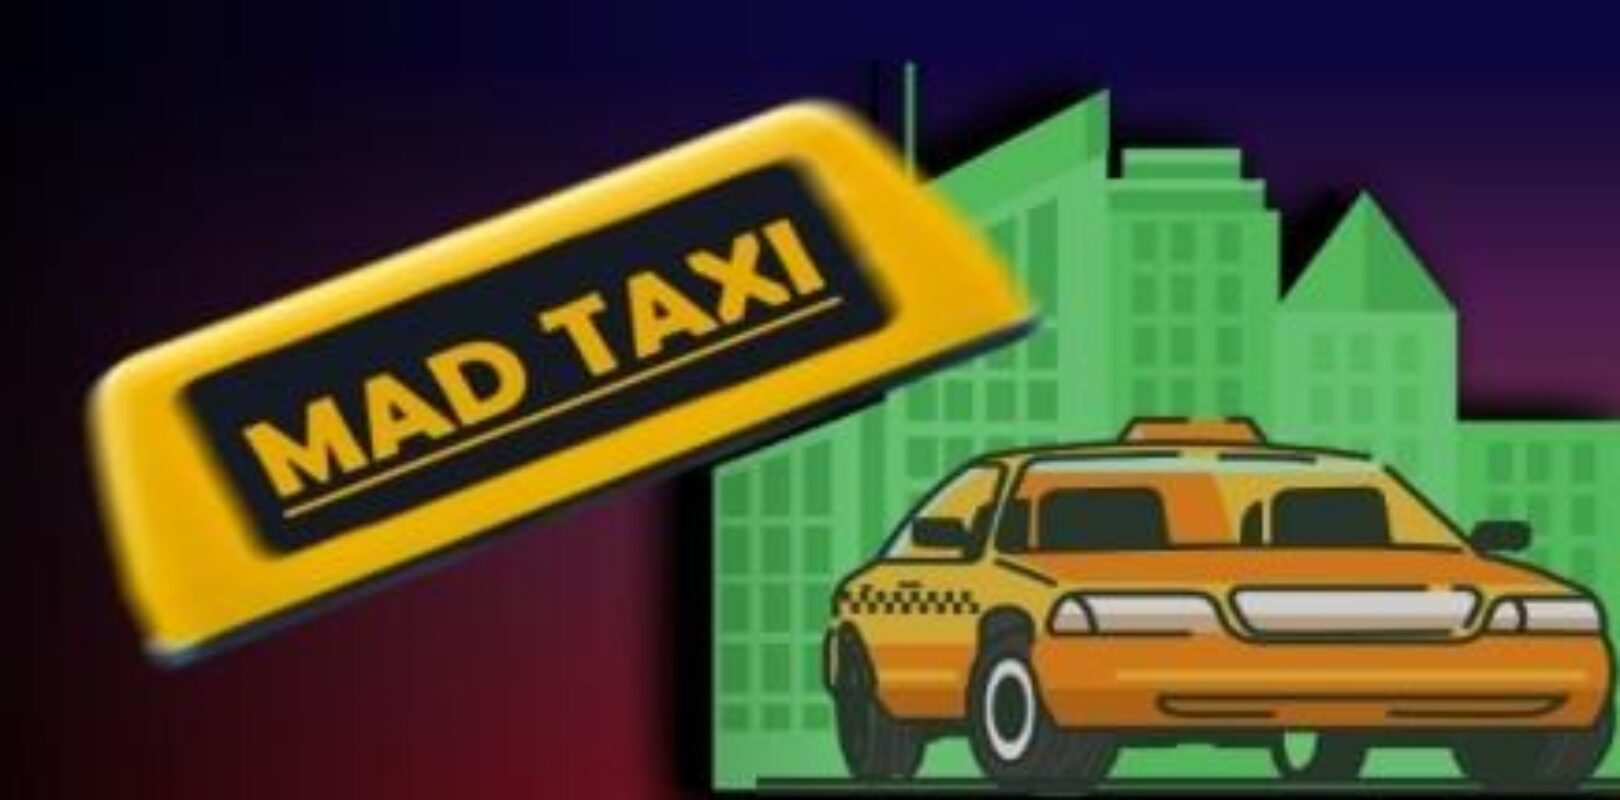 the last taxi driver game steam